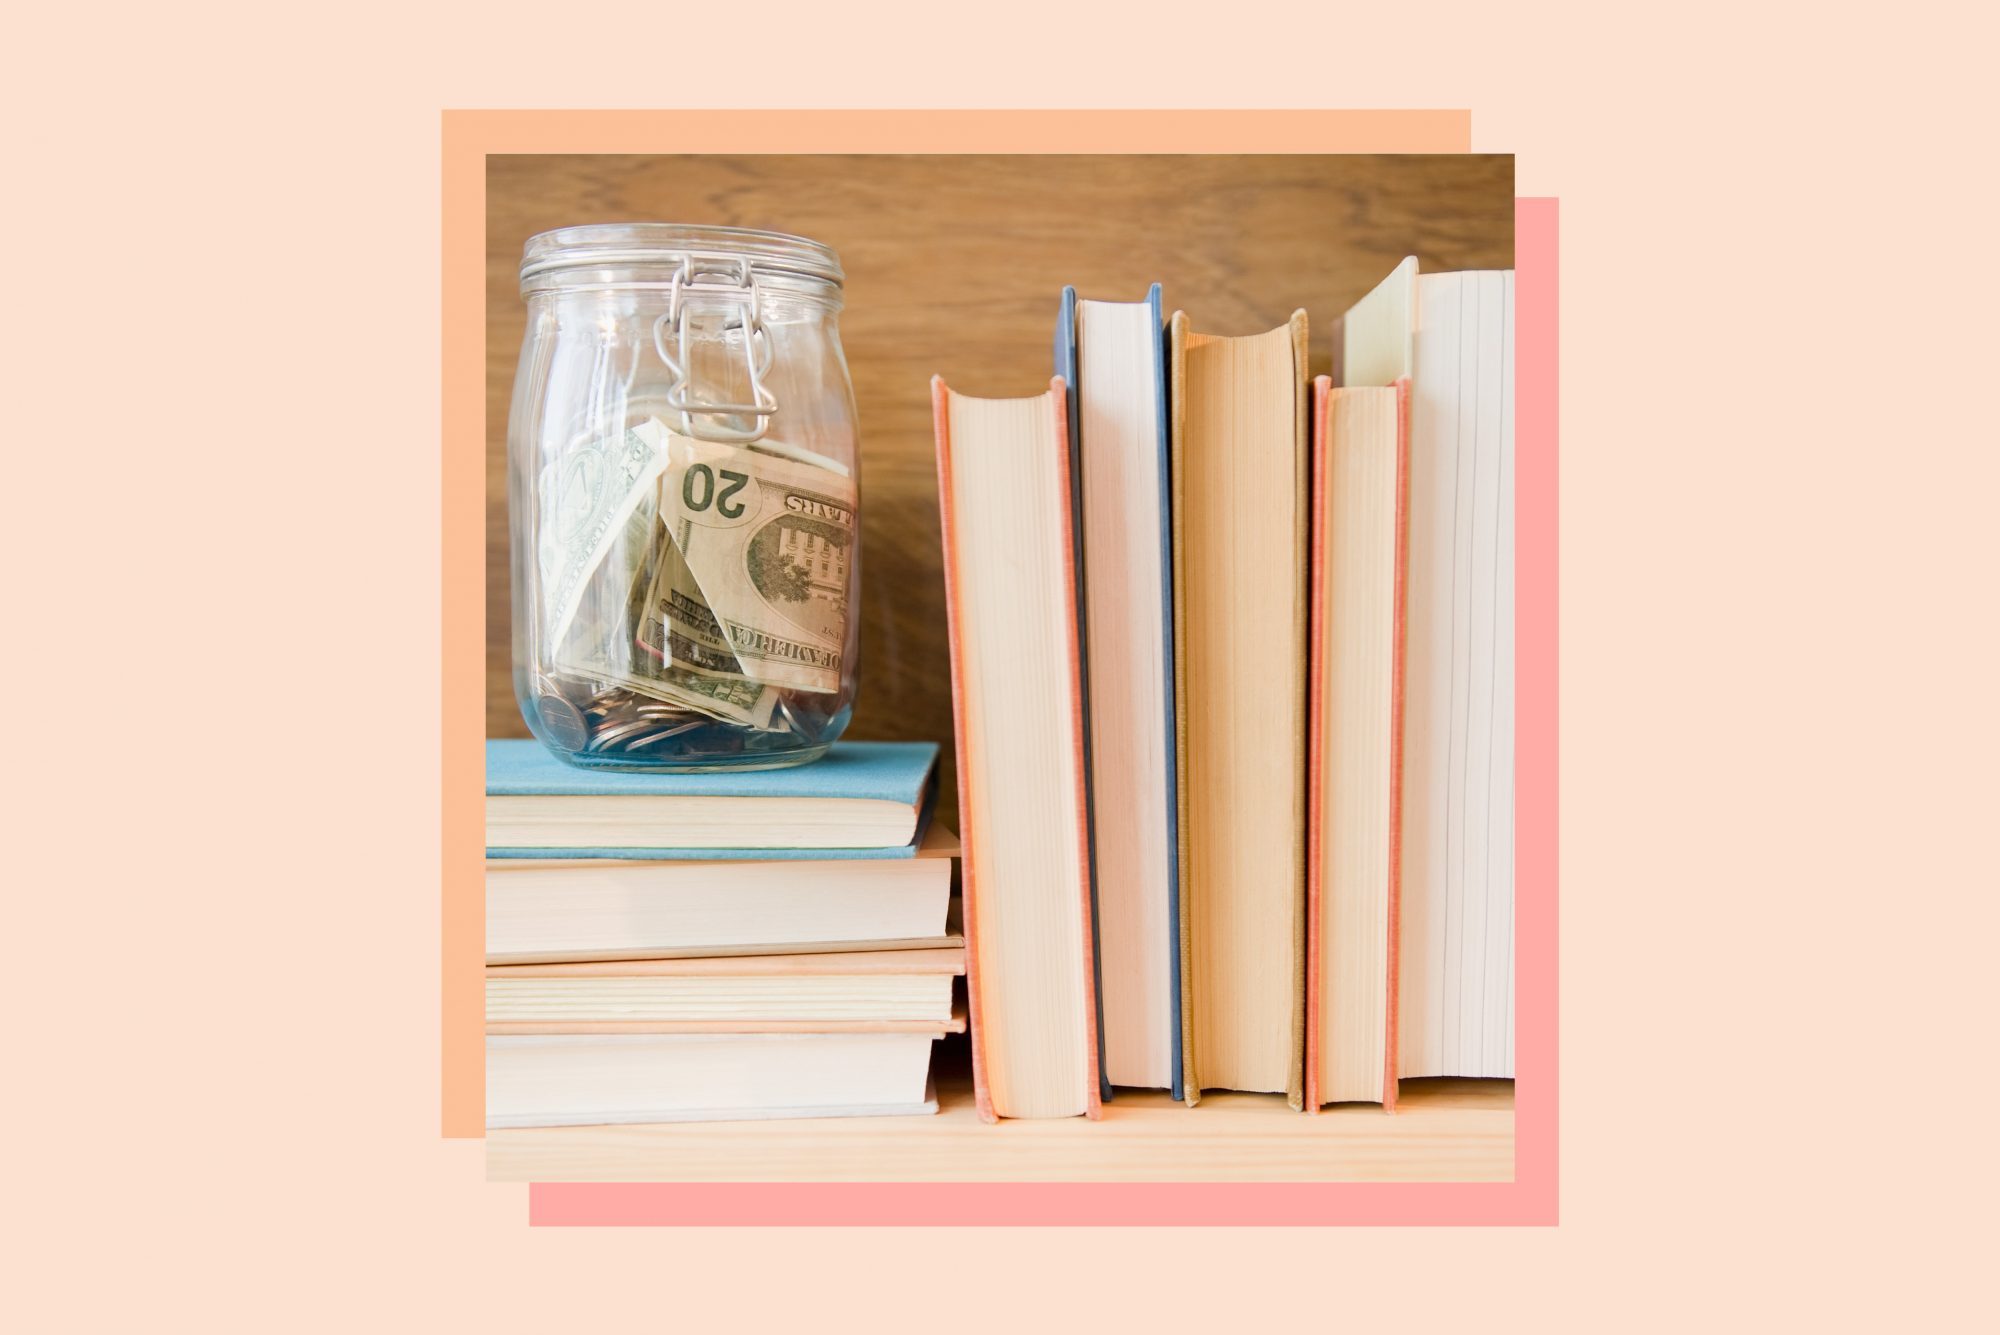 An image of a jar of money and books.